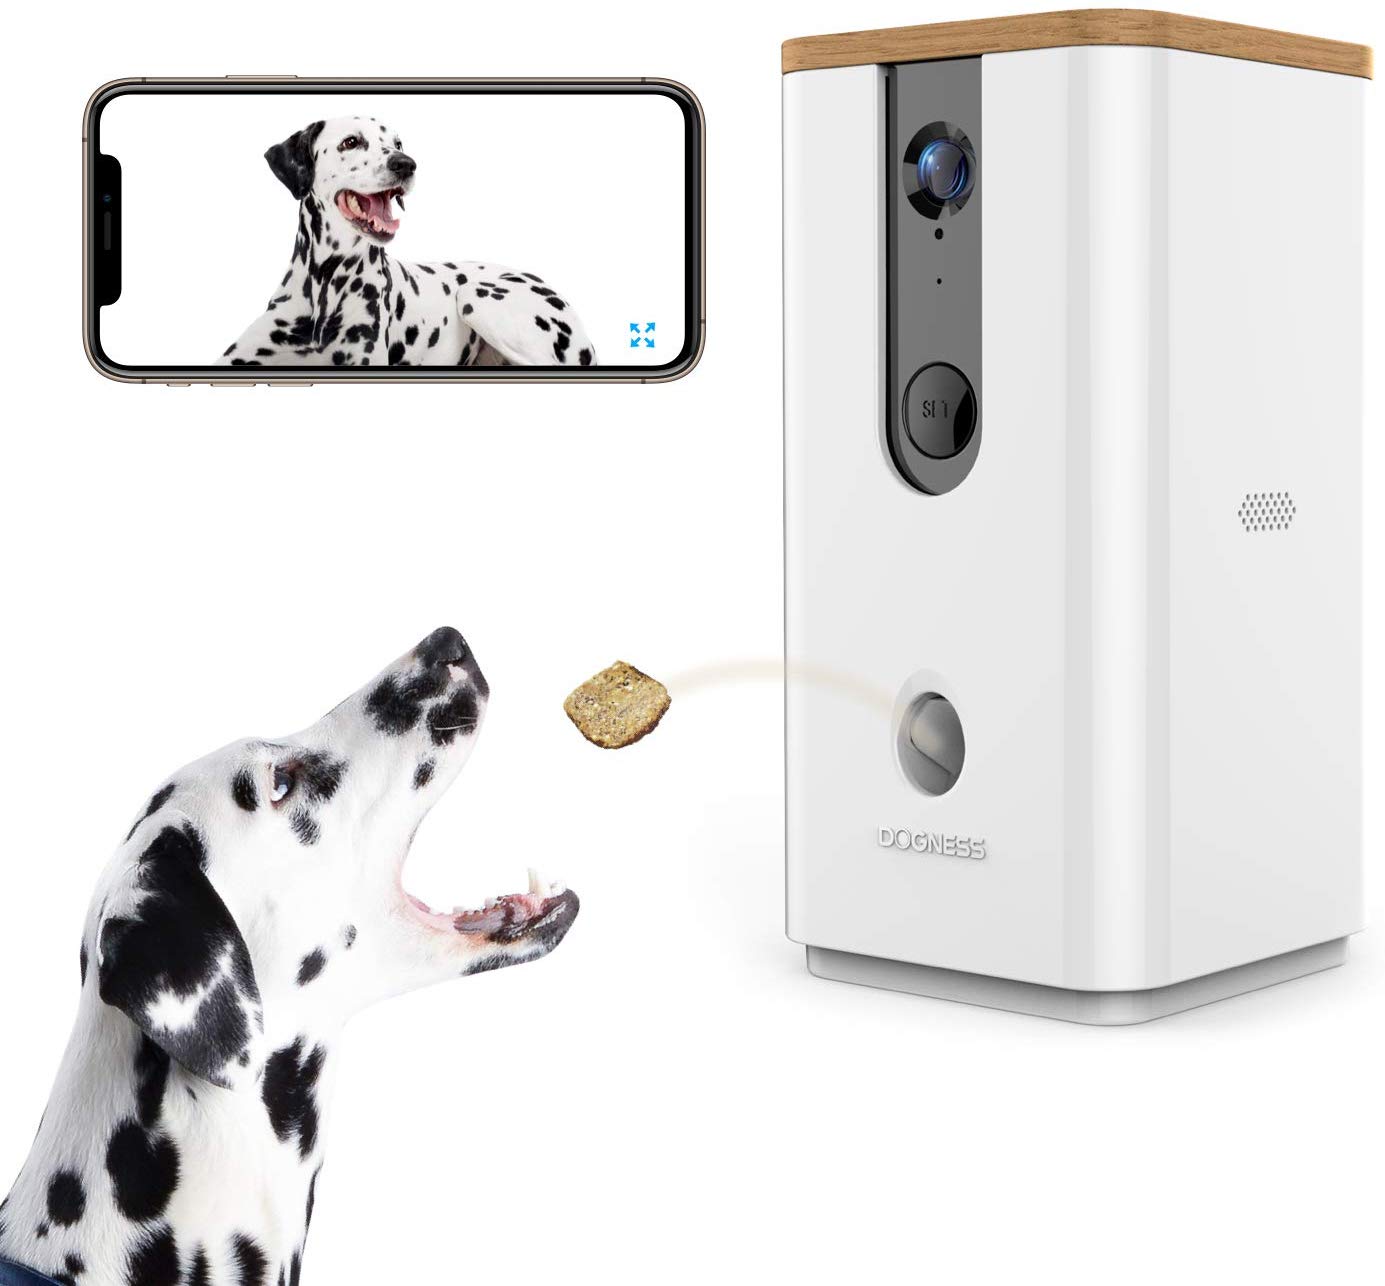 Dog Treat Dispenser with Button - Buy Online